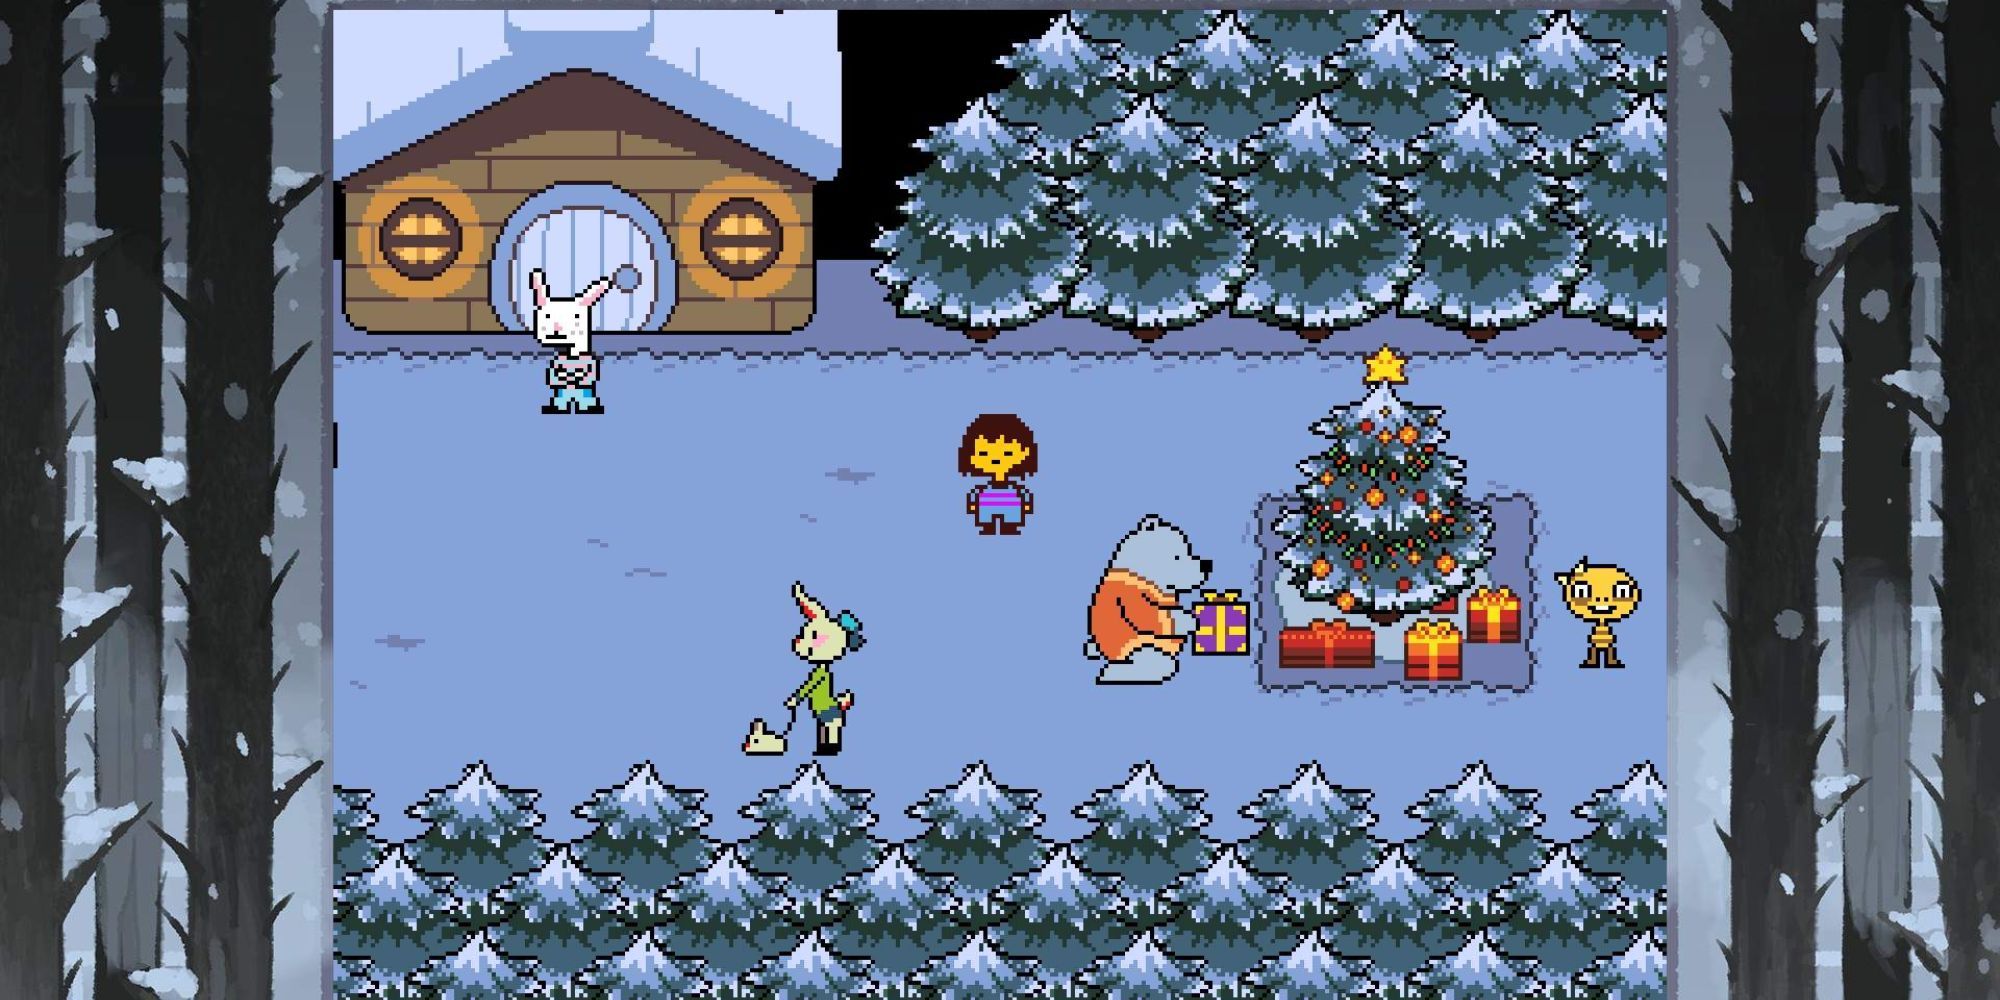 Image from Undertale featuring the main character standing in a snowy area with a Christmas tree